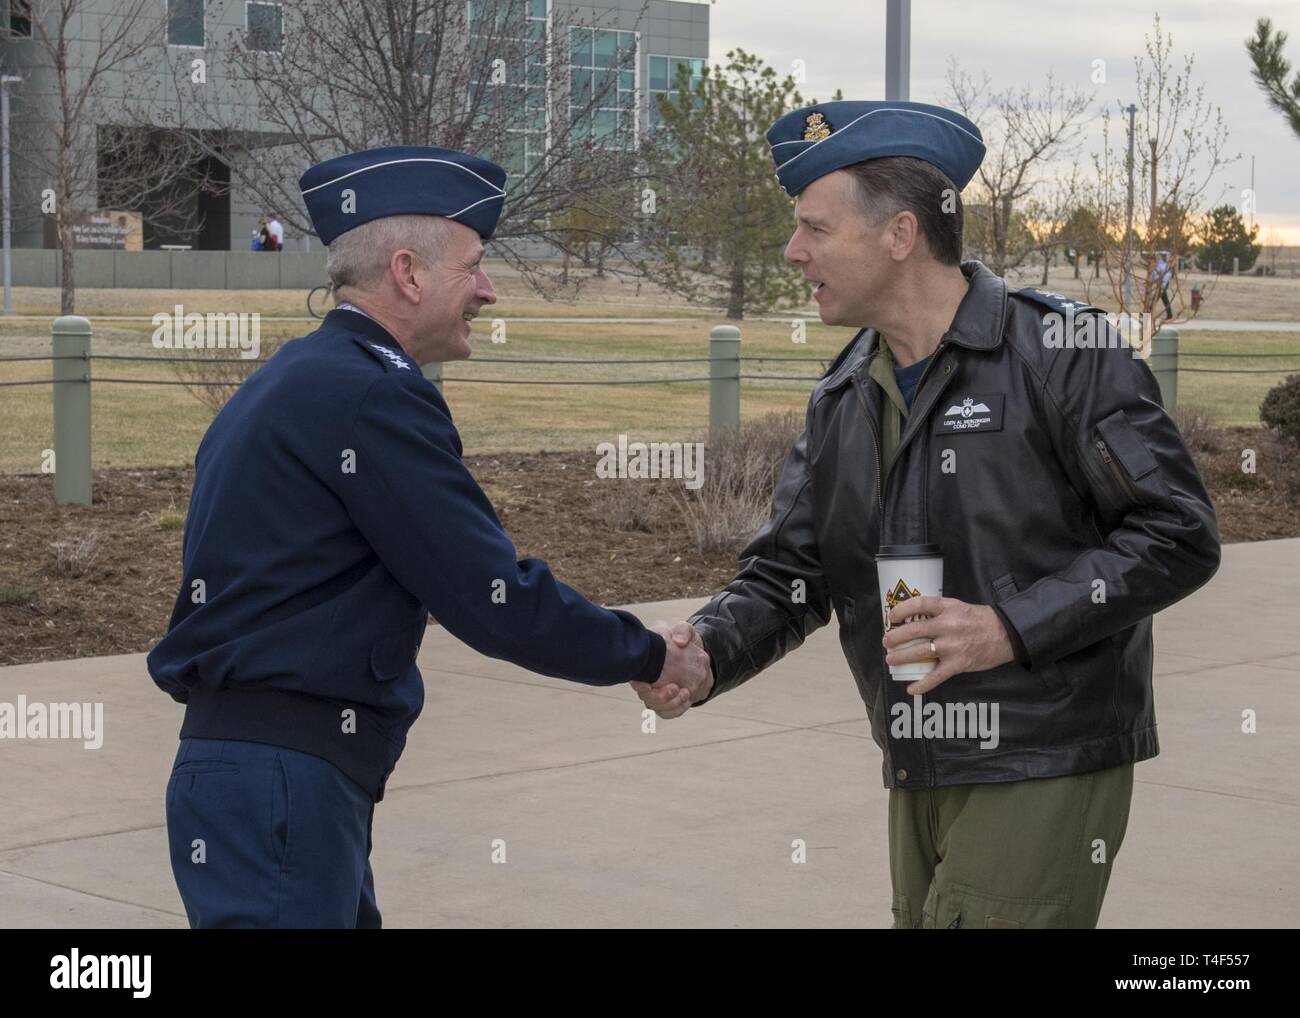 U.S. Air Force Gen. Terrence J. O'Shaughnessy, Commander, North American Aerospace Defense Command and U.S. Northern Command welcomes Royal Canadian Air Force Commander, Lieutenant-General Al Meinzinger to the headquarters in Colorado Springs, Colorado, April 9, 2019. Lieutenant-General Meinzinger's visit is to discuss NORAD modernization efforts and the strong relationship between the RCAF and NORAD. Stock Photo